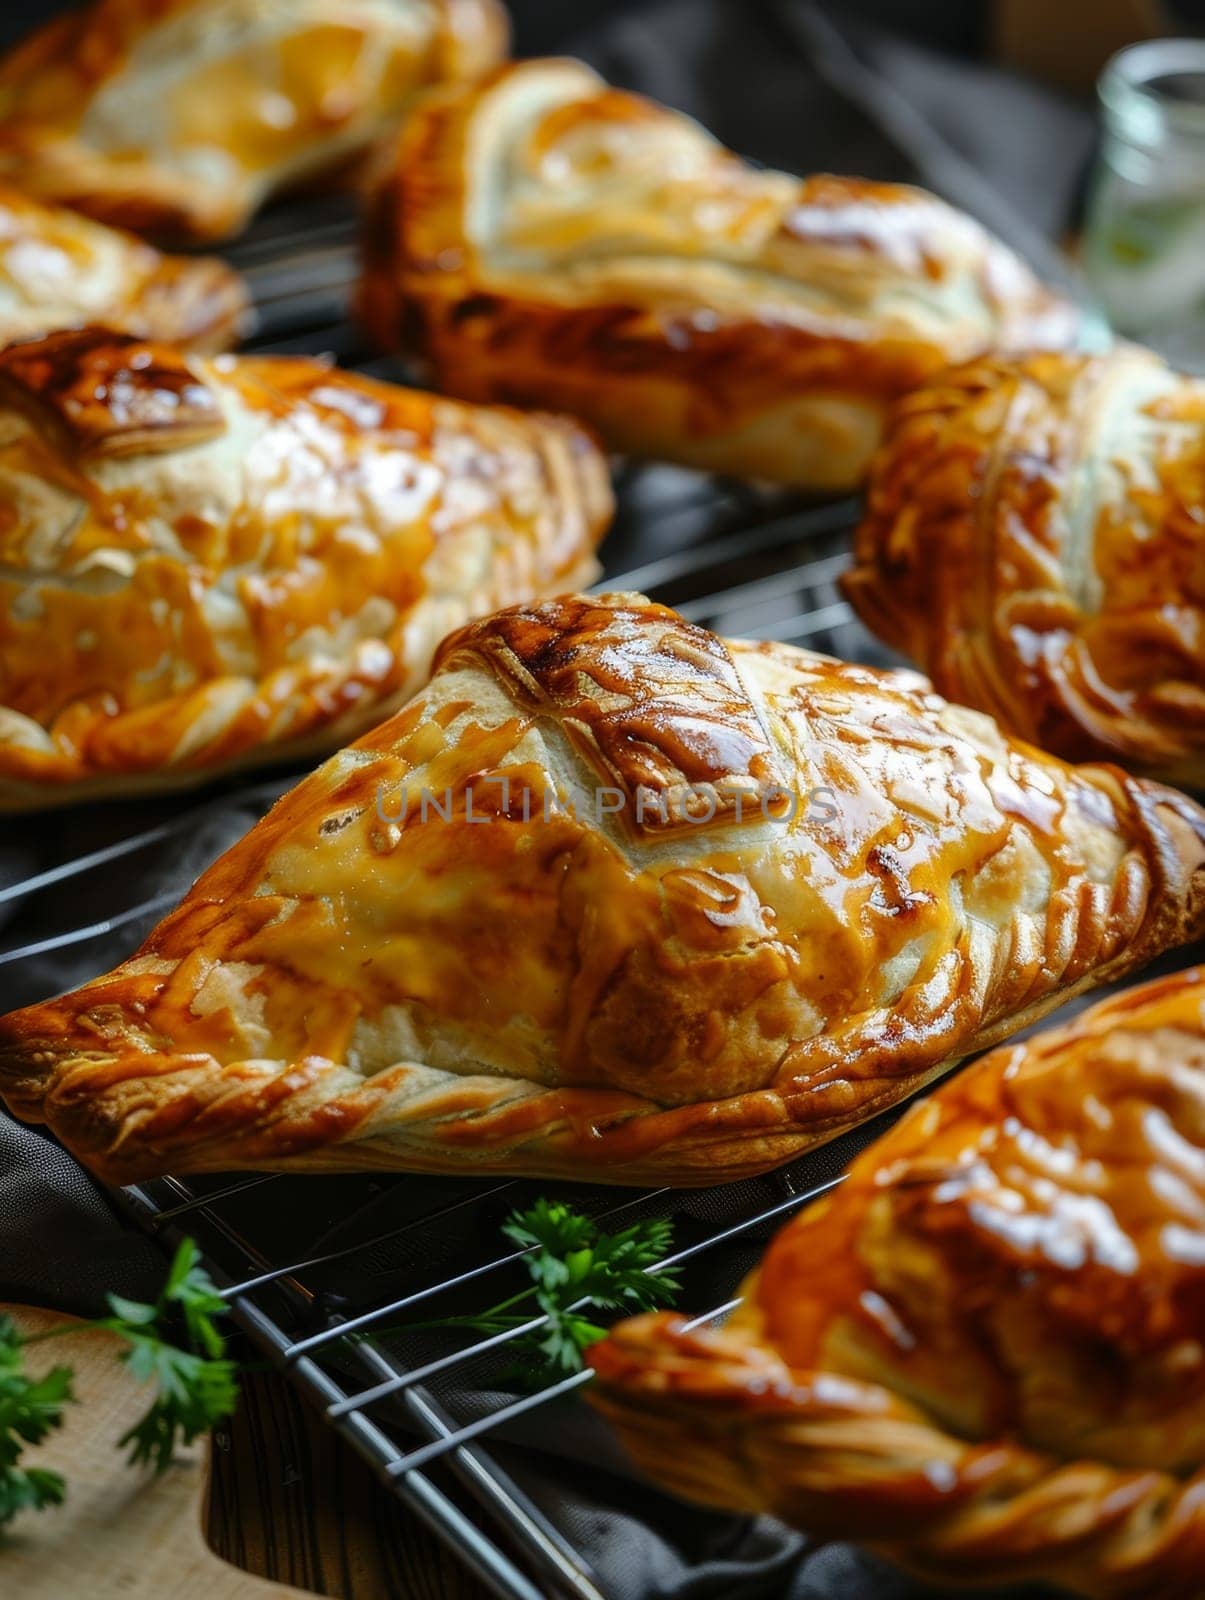 Moldovan placinte on a cooling rack, filled pastries with cheese or fruit. A traditional and flavorful dish from Moldova.